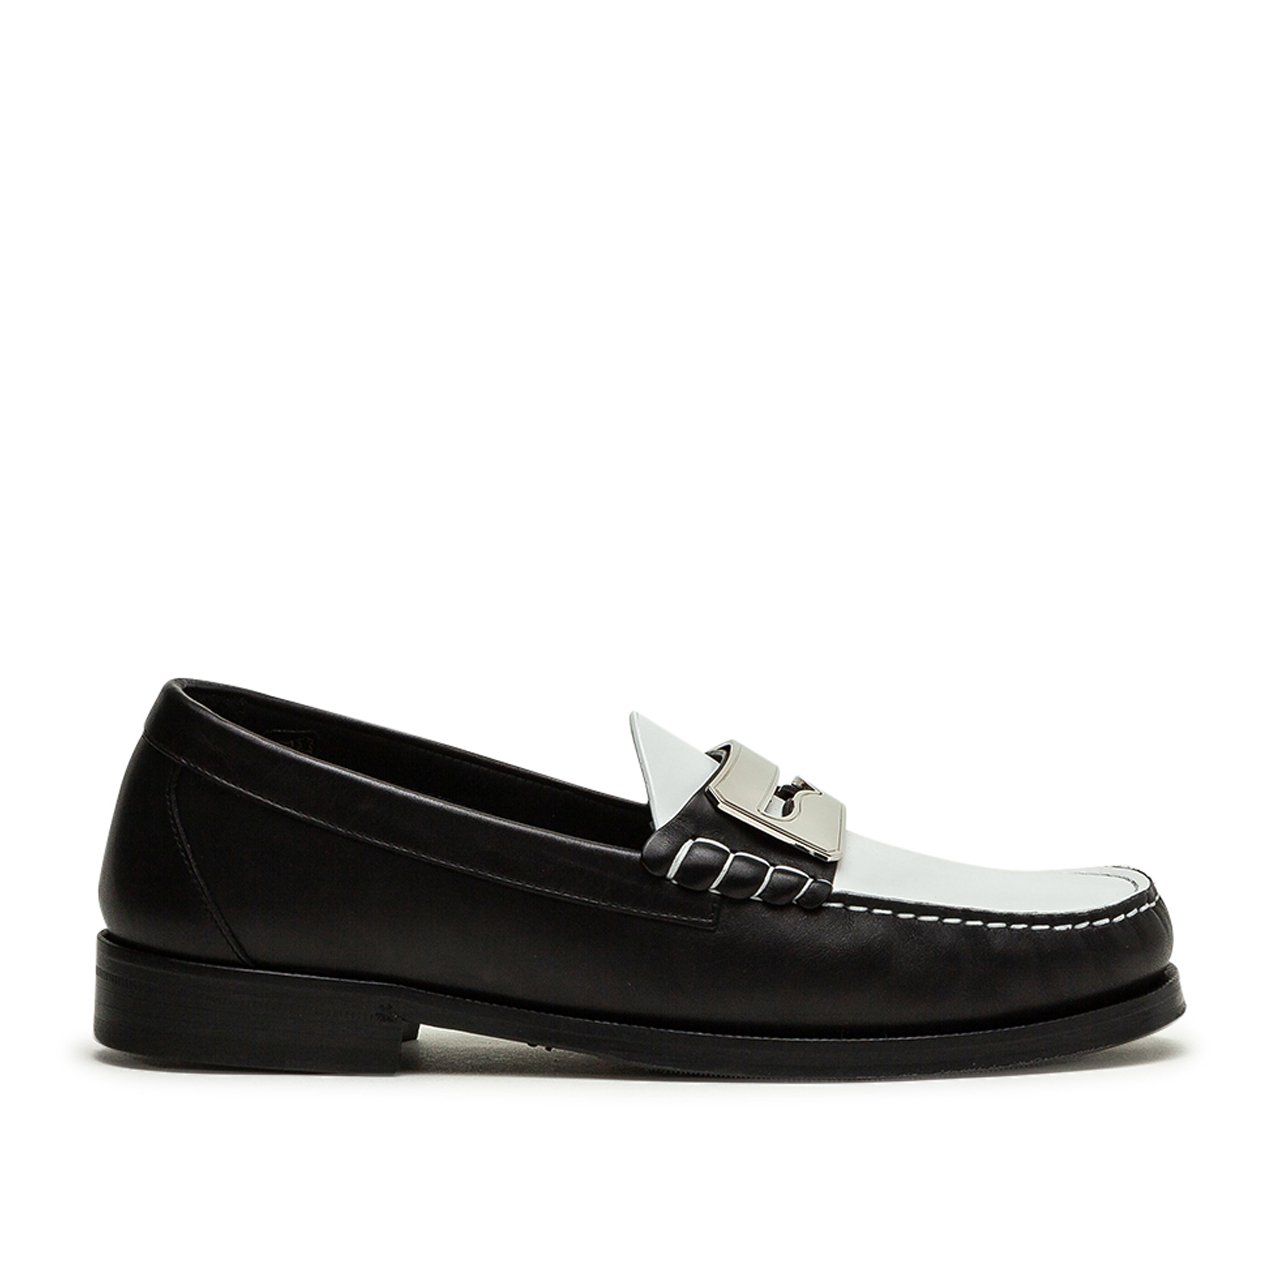 buscemi town loafer (black / white) - 120smbenpn99of - a.plus - Image - 1